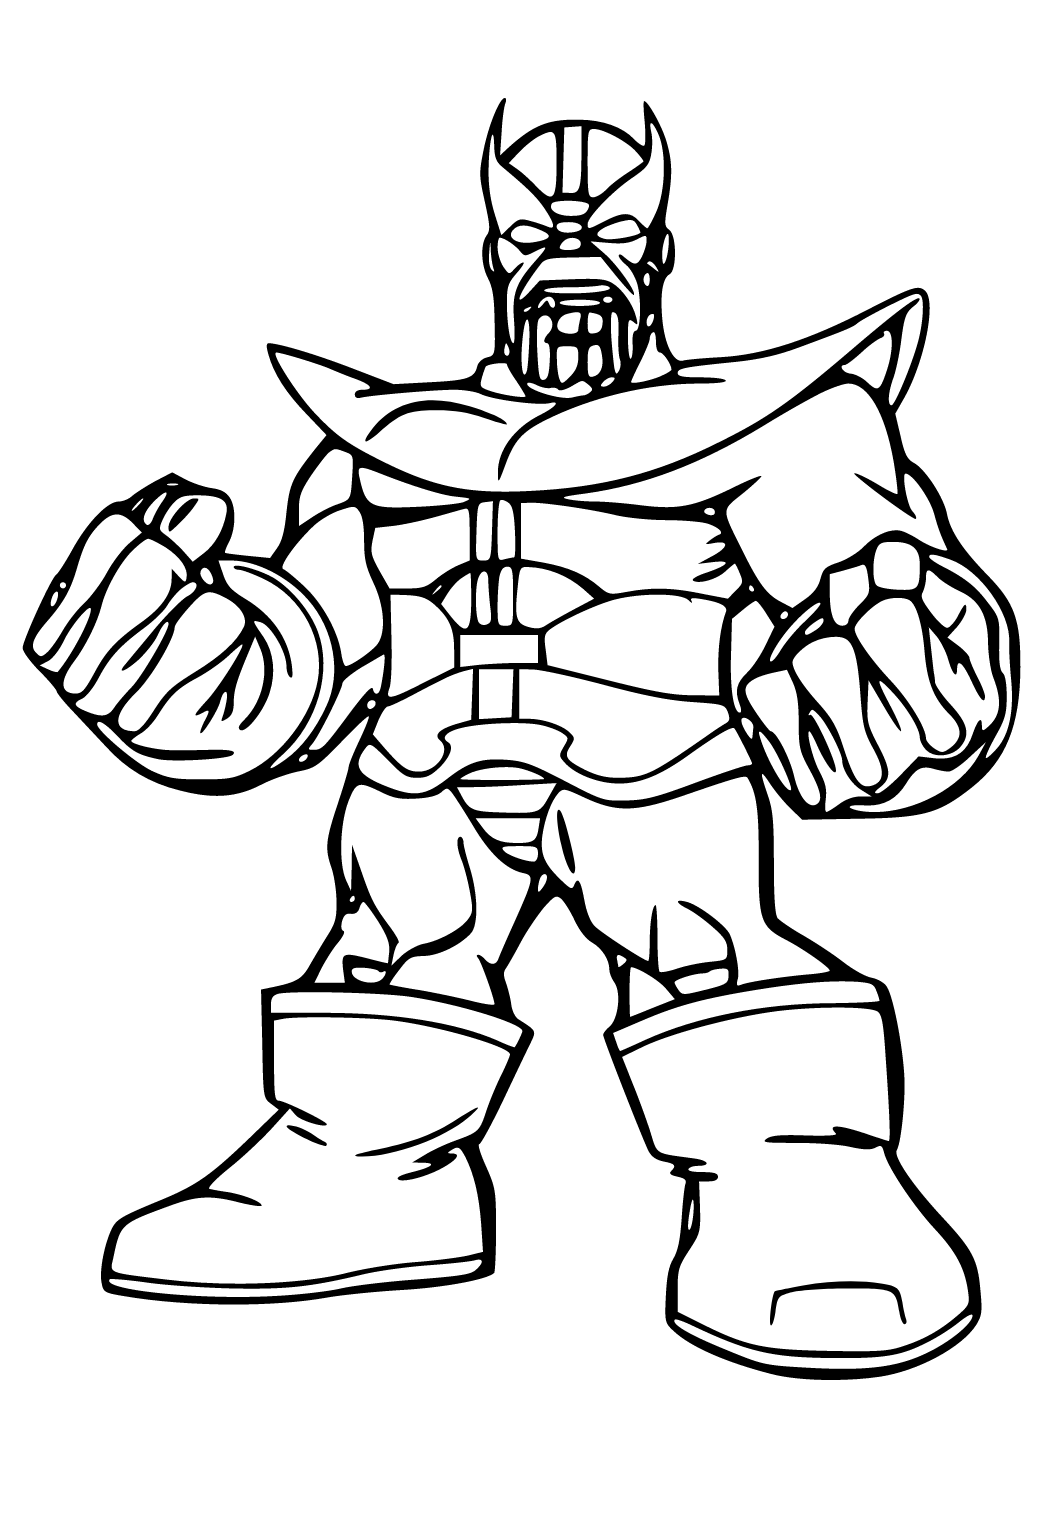 Free printable thanos cute coloring page for adults and kids